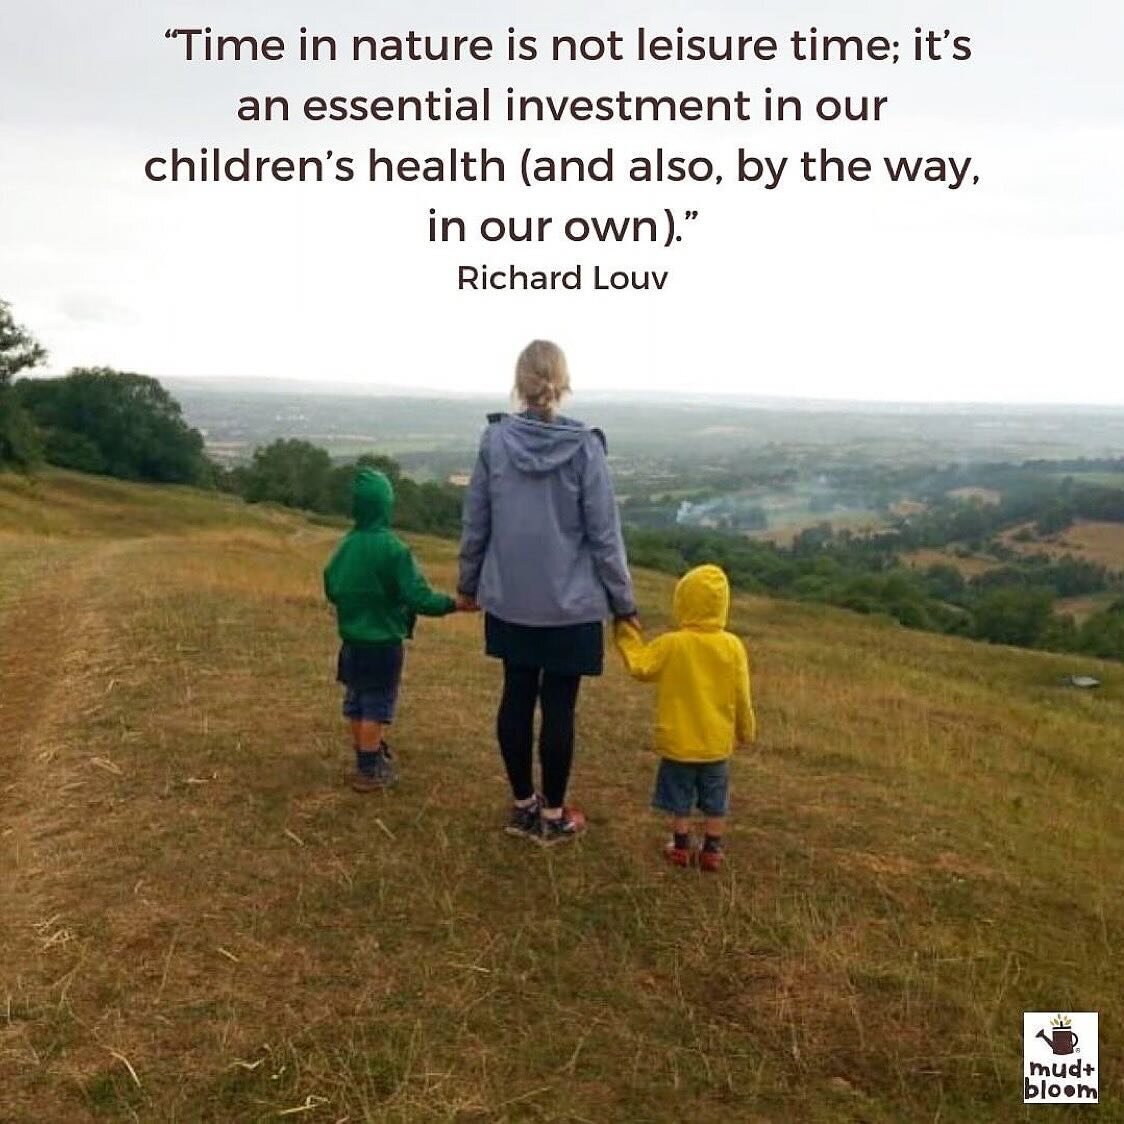 &ldquo;Time in nature is not leisure time; it&rsquo;s an essential investment in our children&rsquo;s health (and also, by the way our own).&rdquo;
Richard Louv

#natureconnection #parenting #mudandbloom #nature #mentalhealth